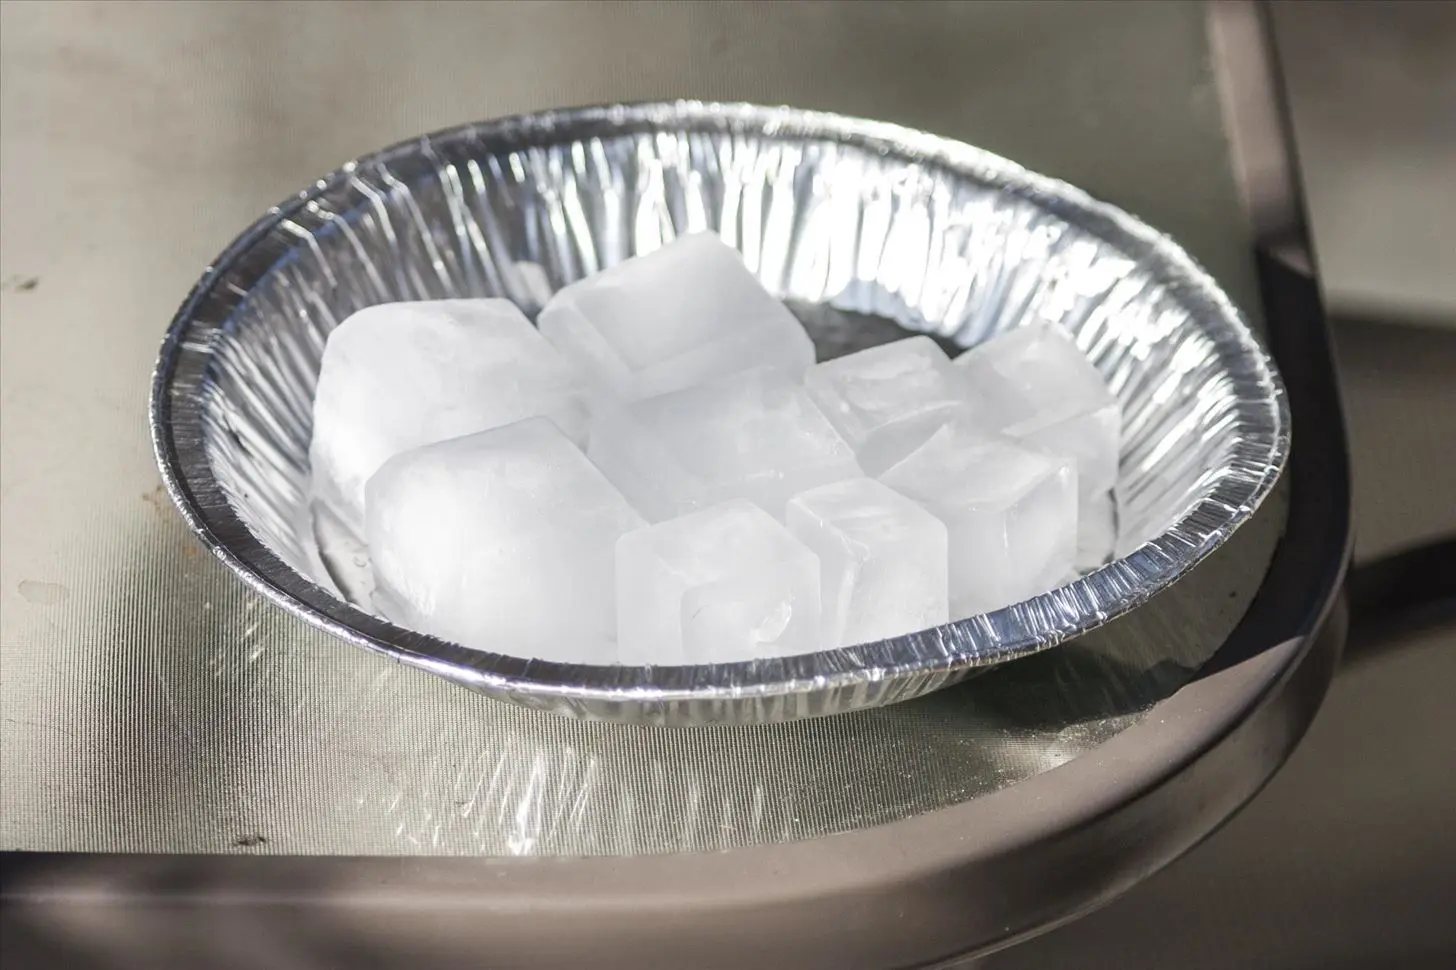 how to make smoked ice - How long to smoke water for smoked ice